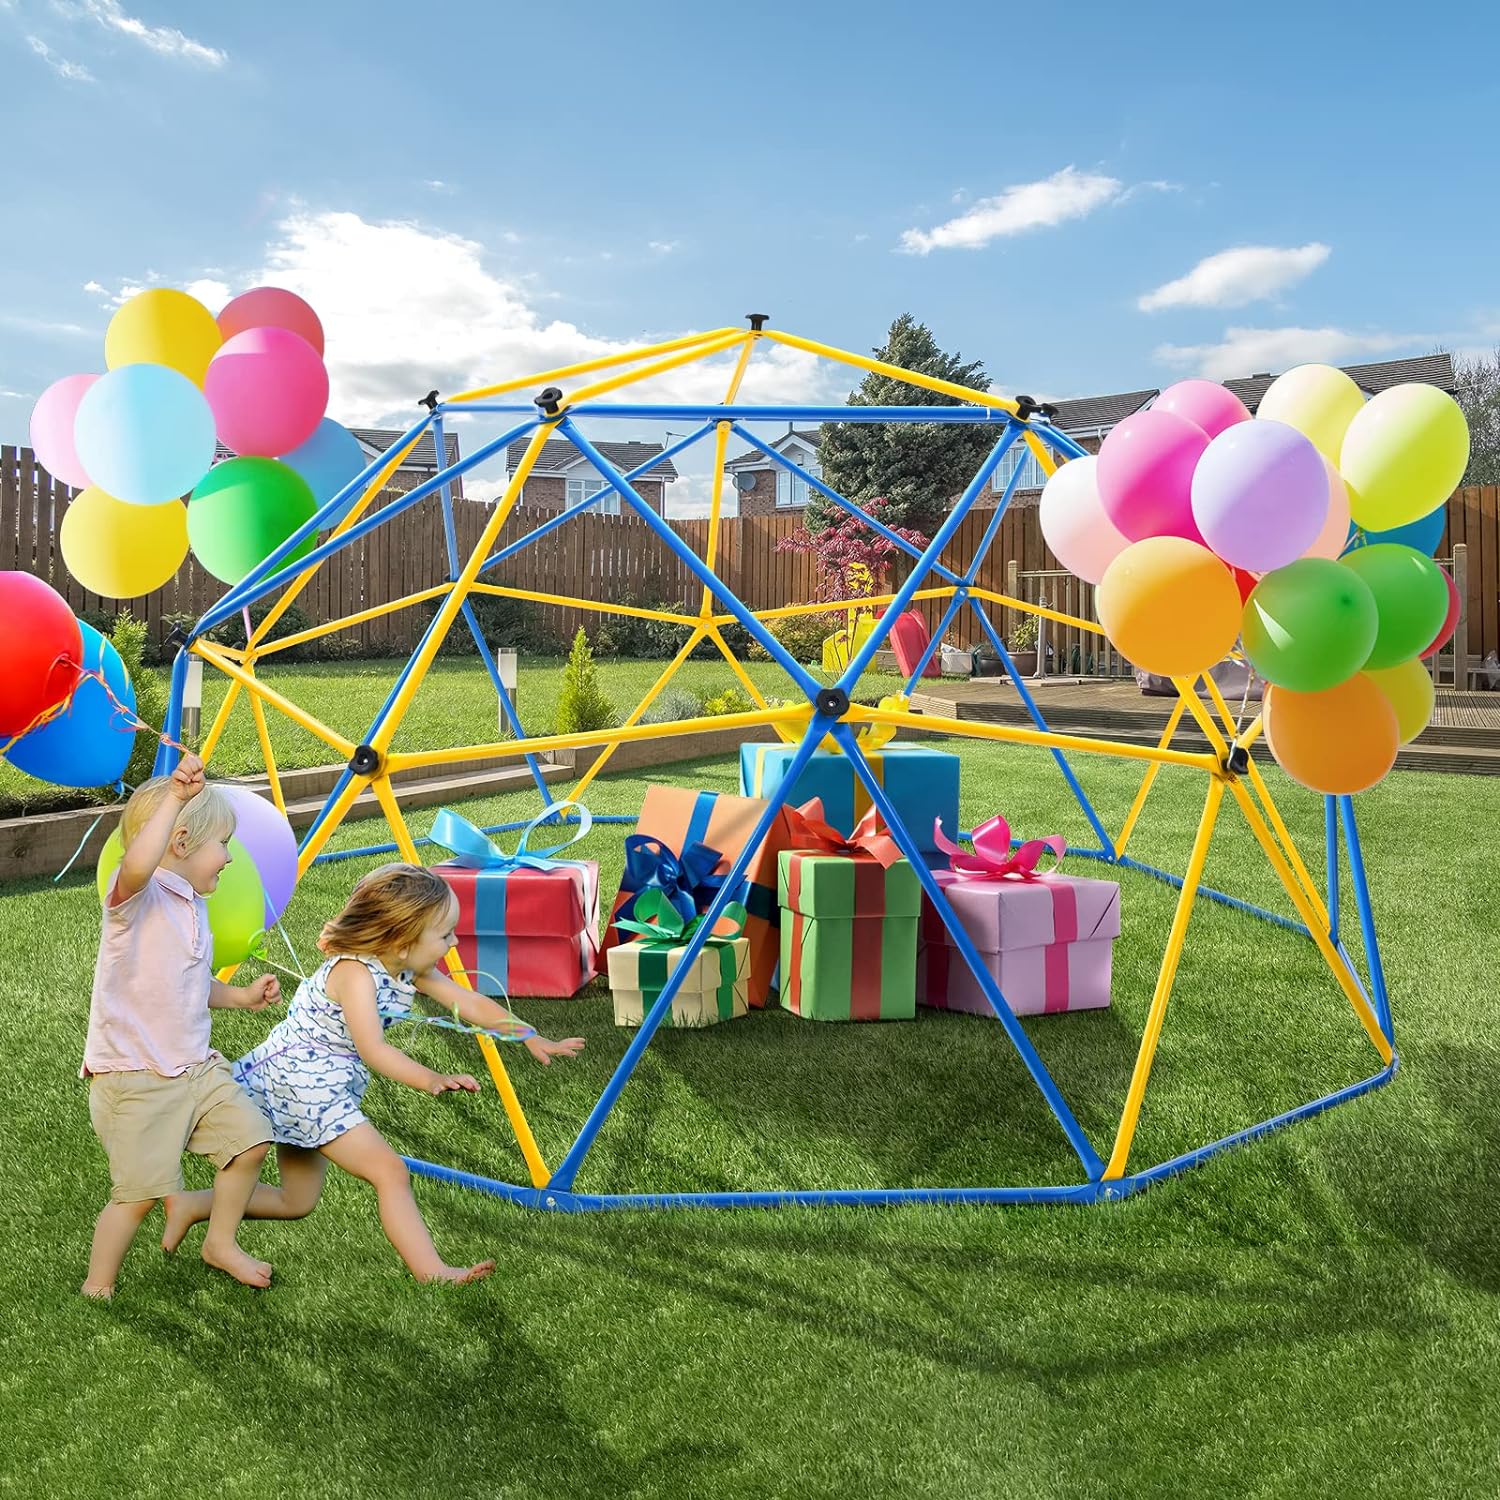 Upgraded 10FT Climbing Dome with Canopy and Swing, Dome Climber for Kids 3 - 10, Weight Capability 800LBS, Rust and UV Resistant Steel